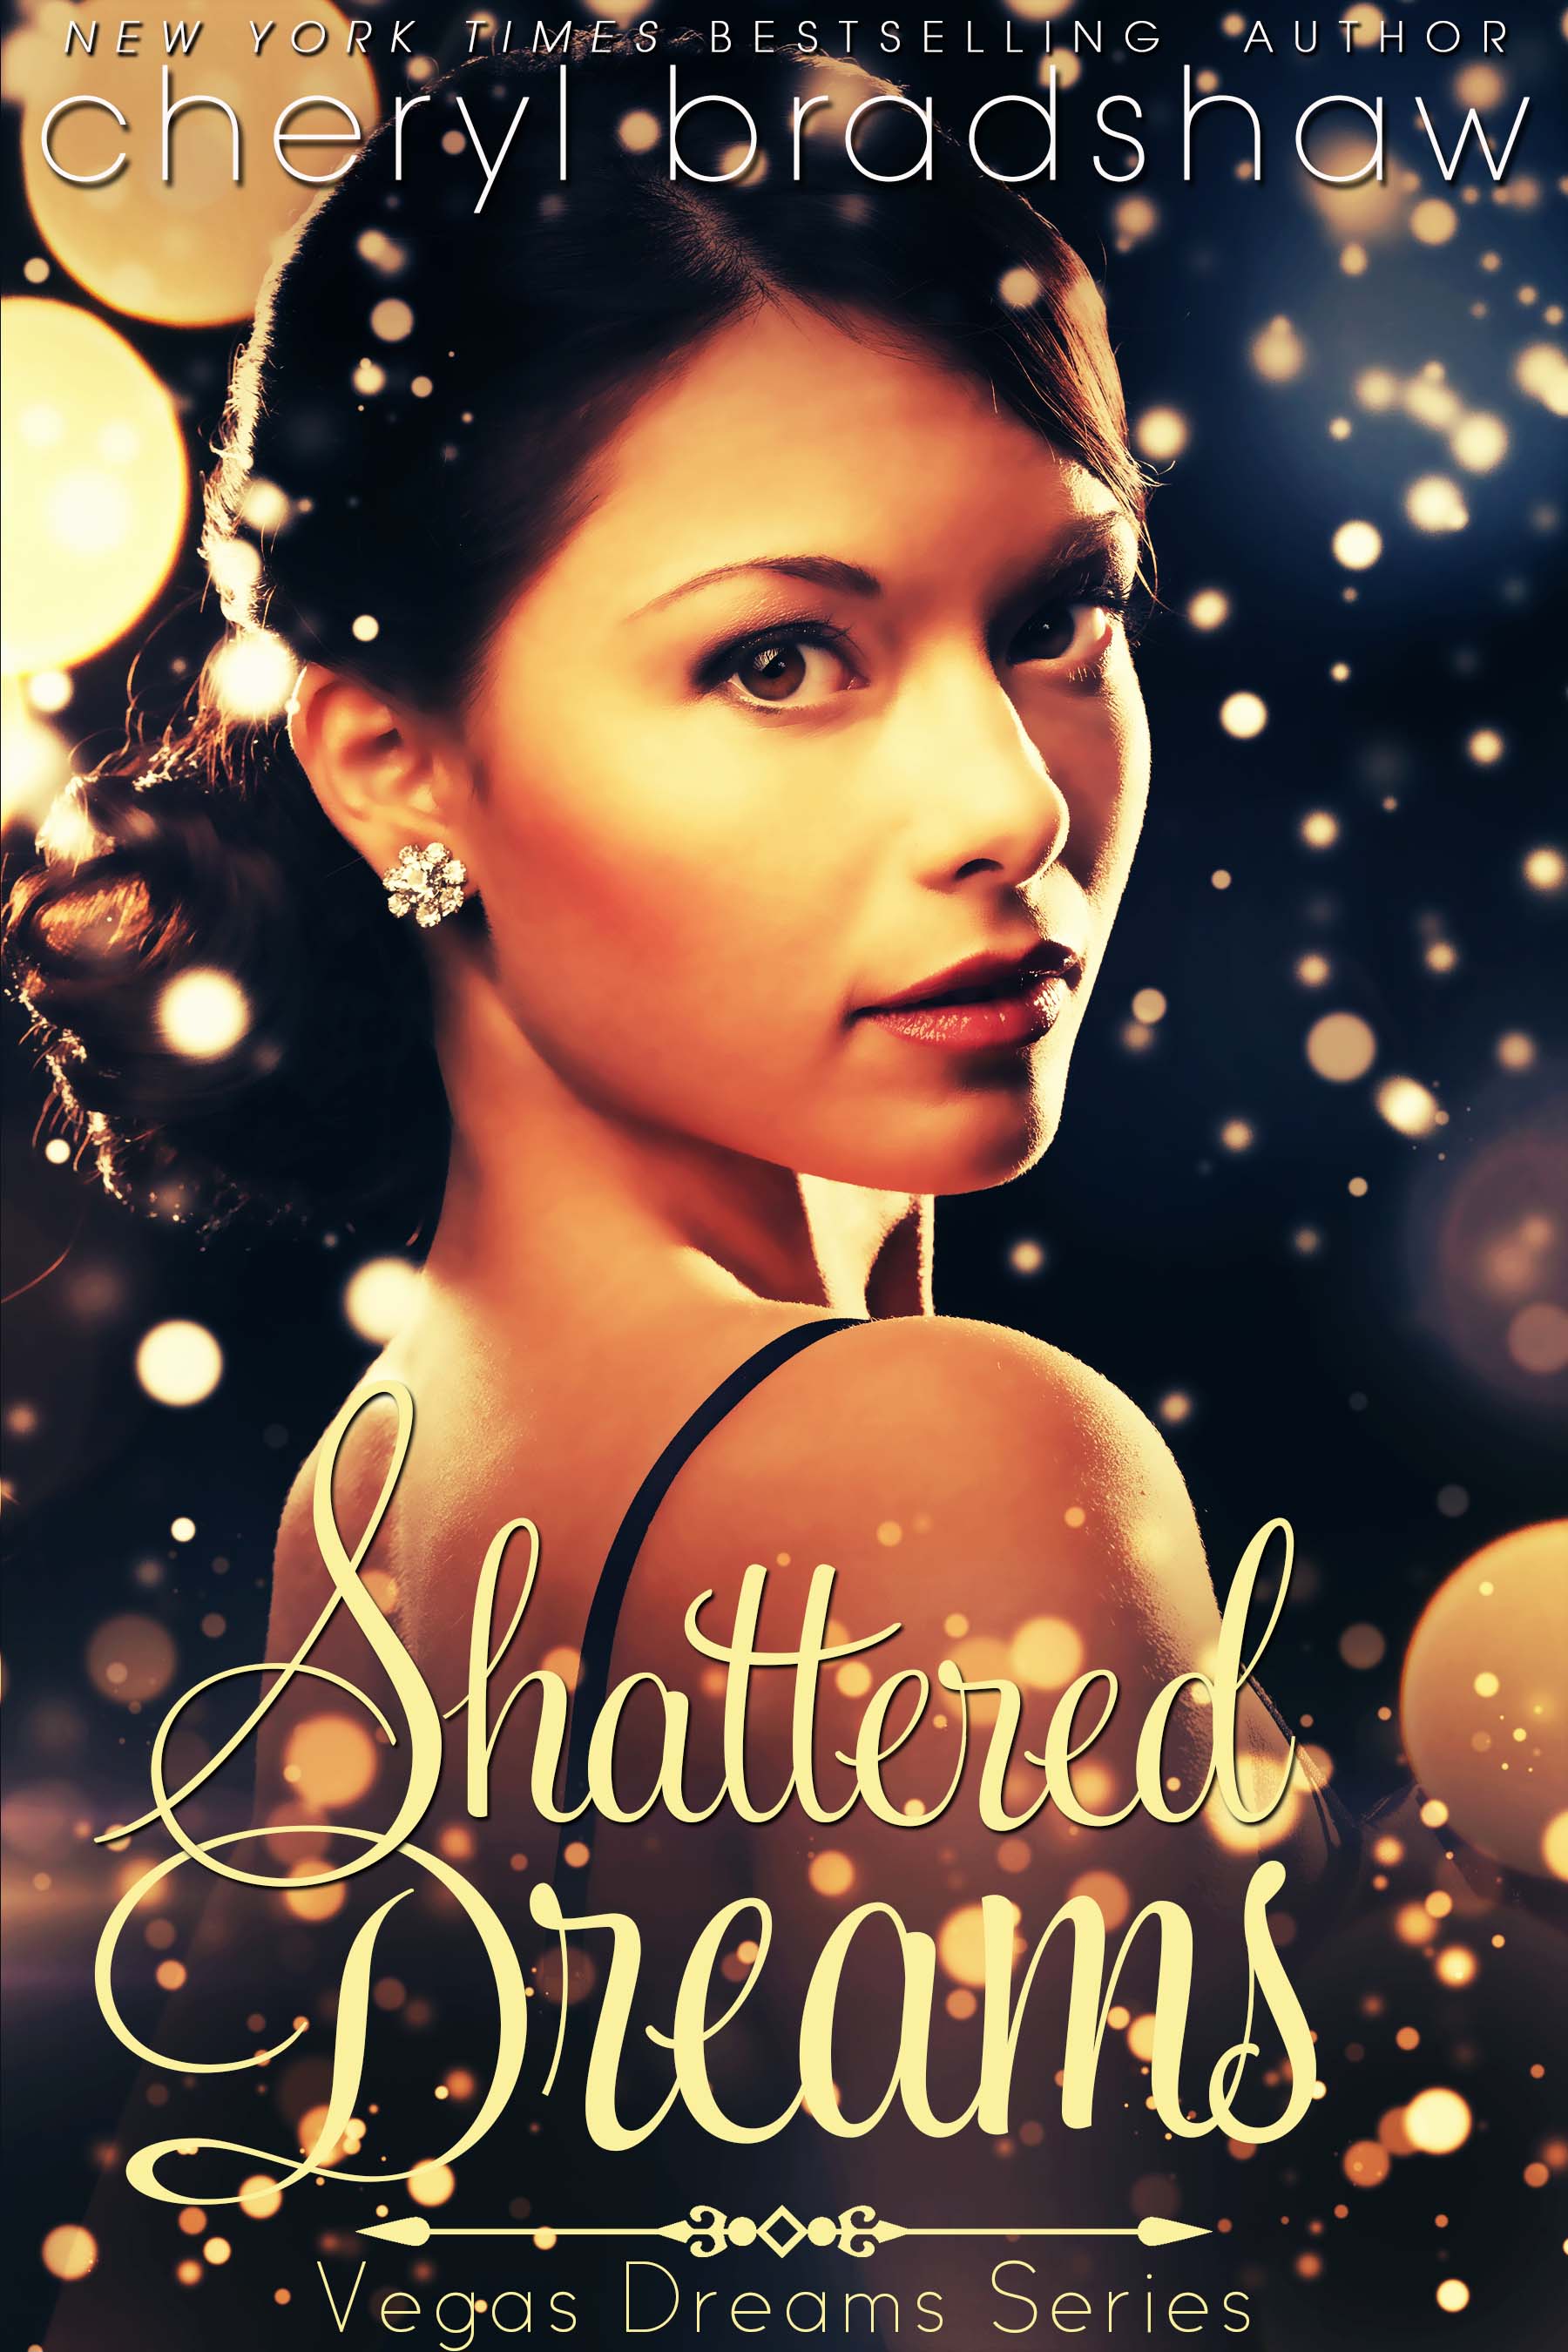 Shattered Dreams by Cheryl Bradshaw New York Times bestselling author